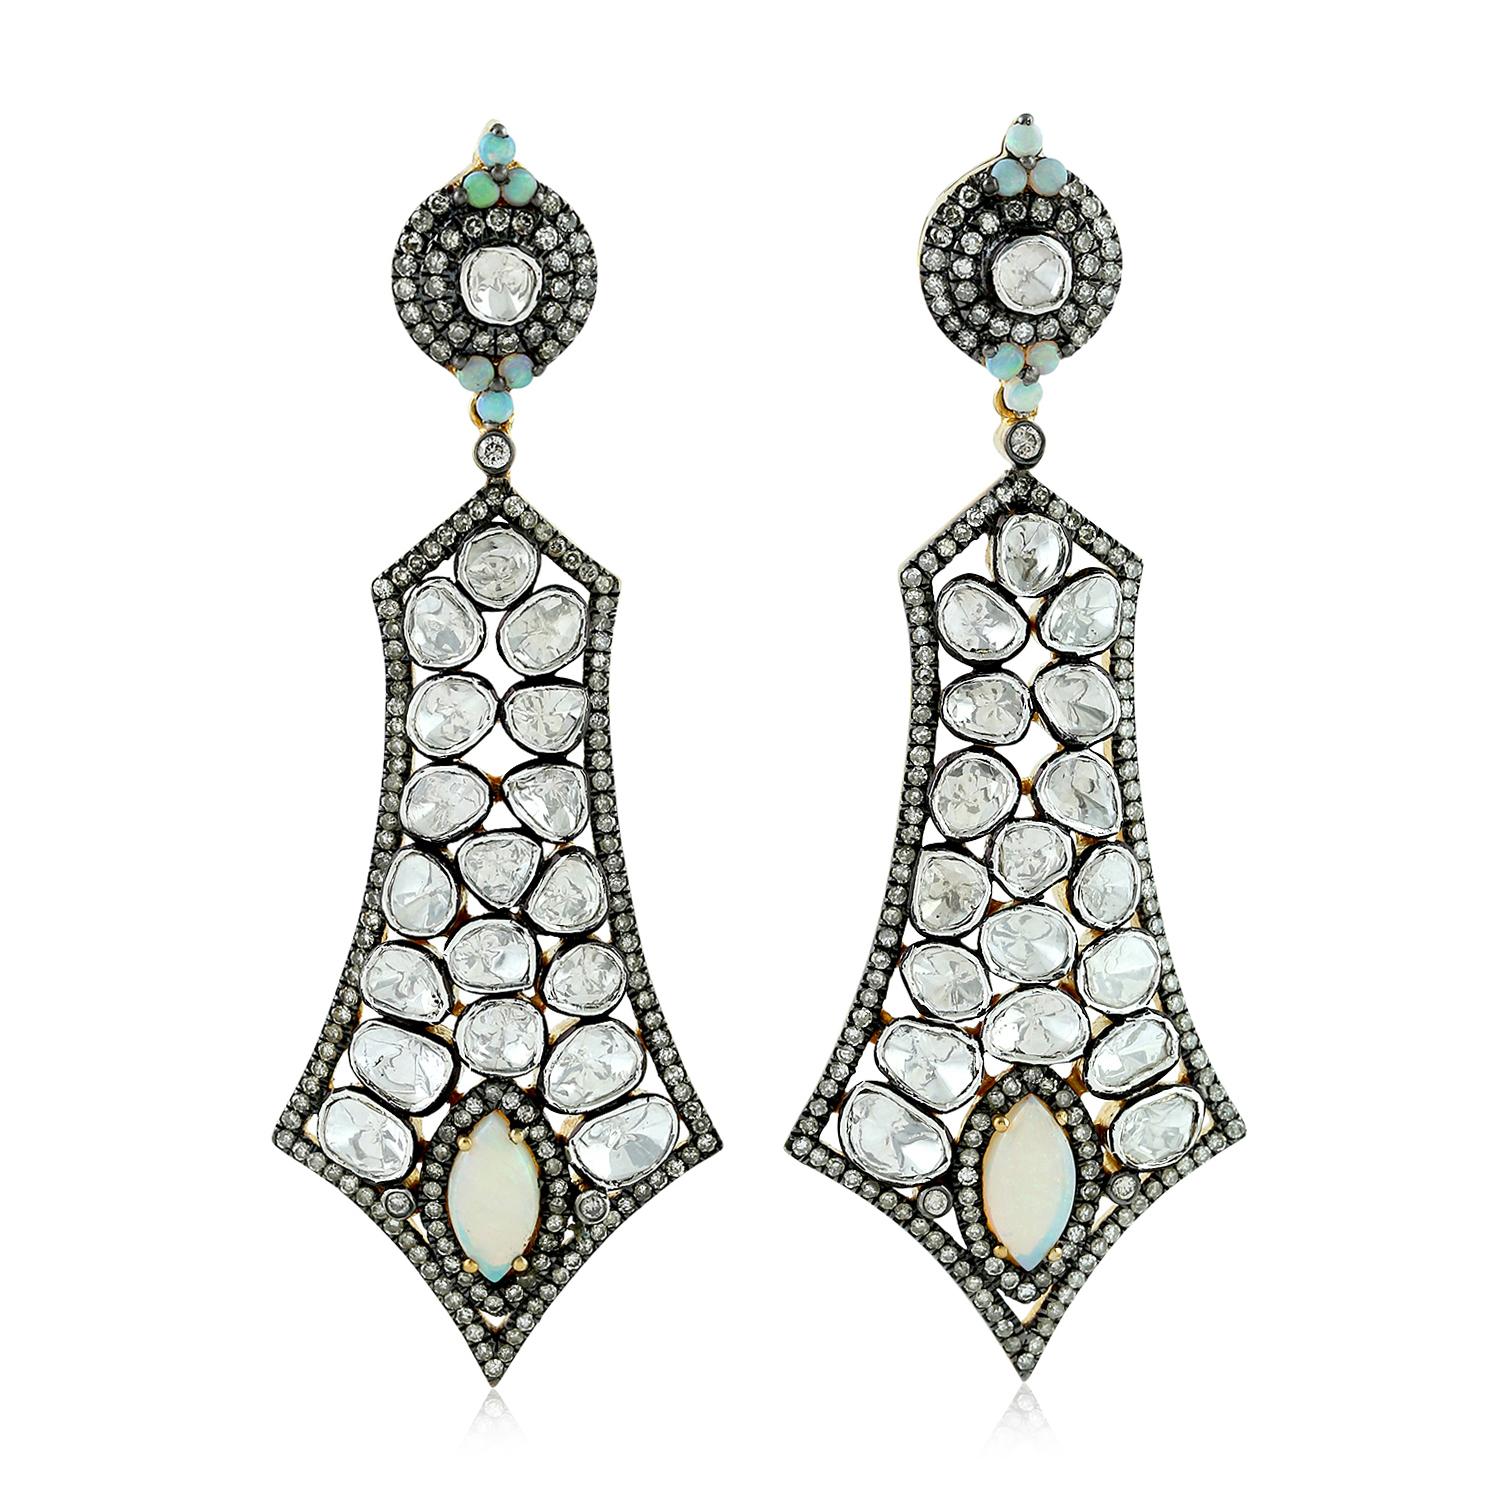 Rose Cut Diamond & Ethiopian Opal Earrings Made In 18k Yellow Gold & Silver In New Condition For Sale In New York, NY